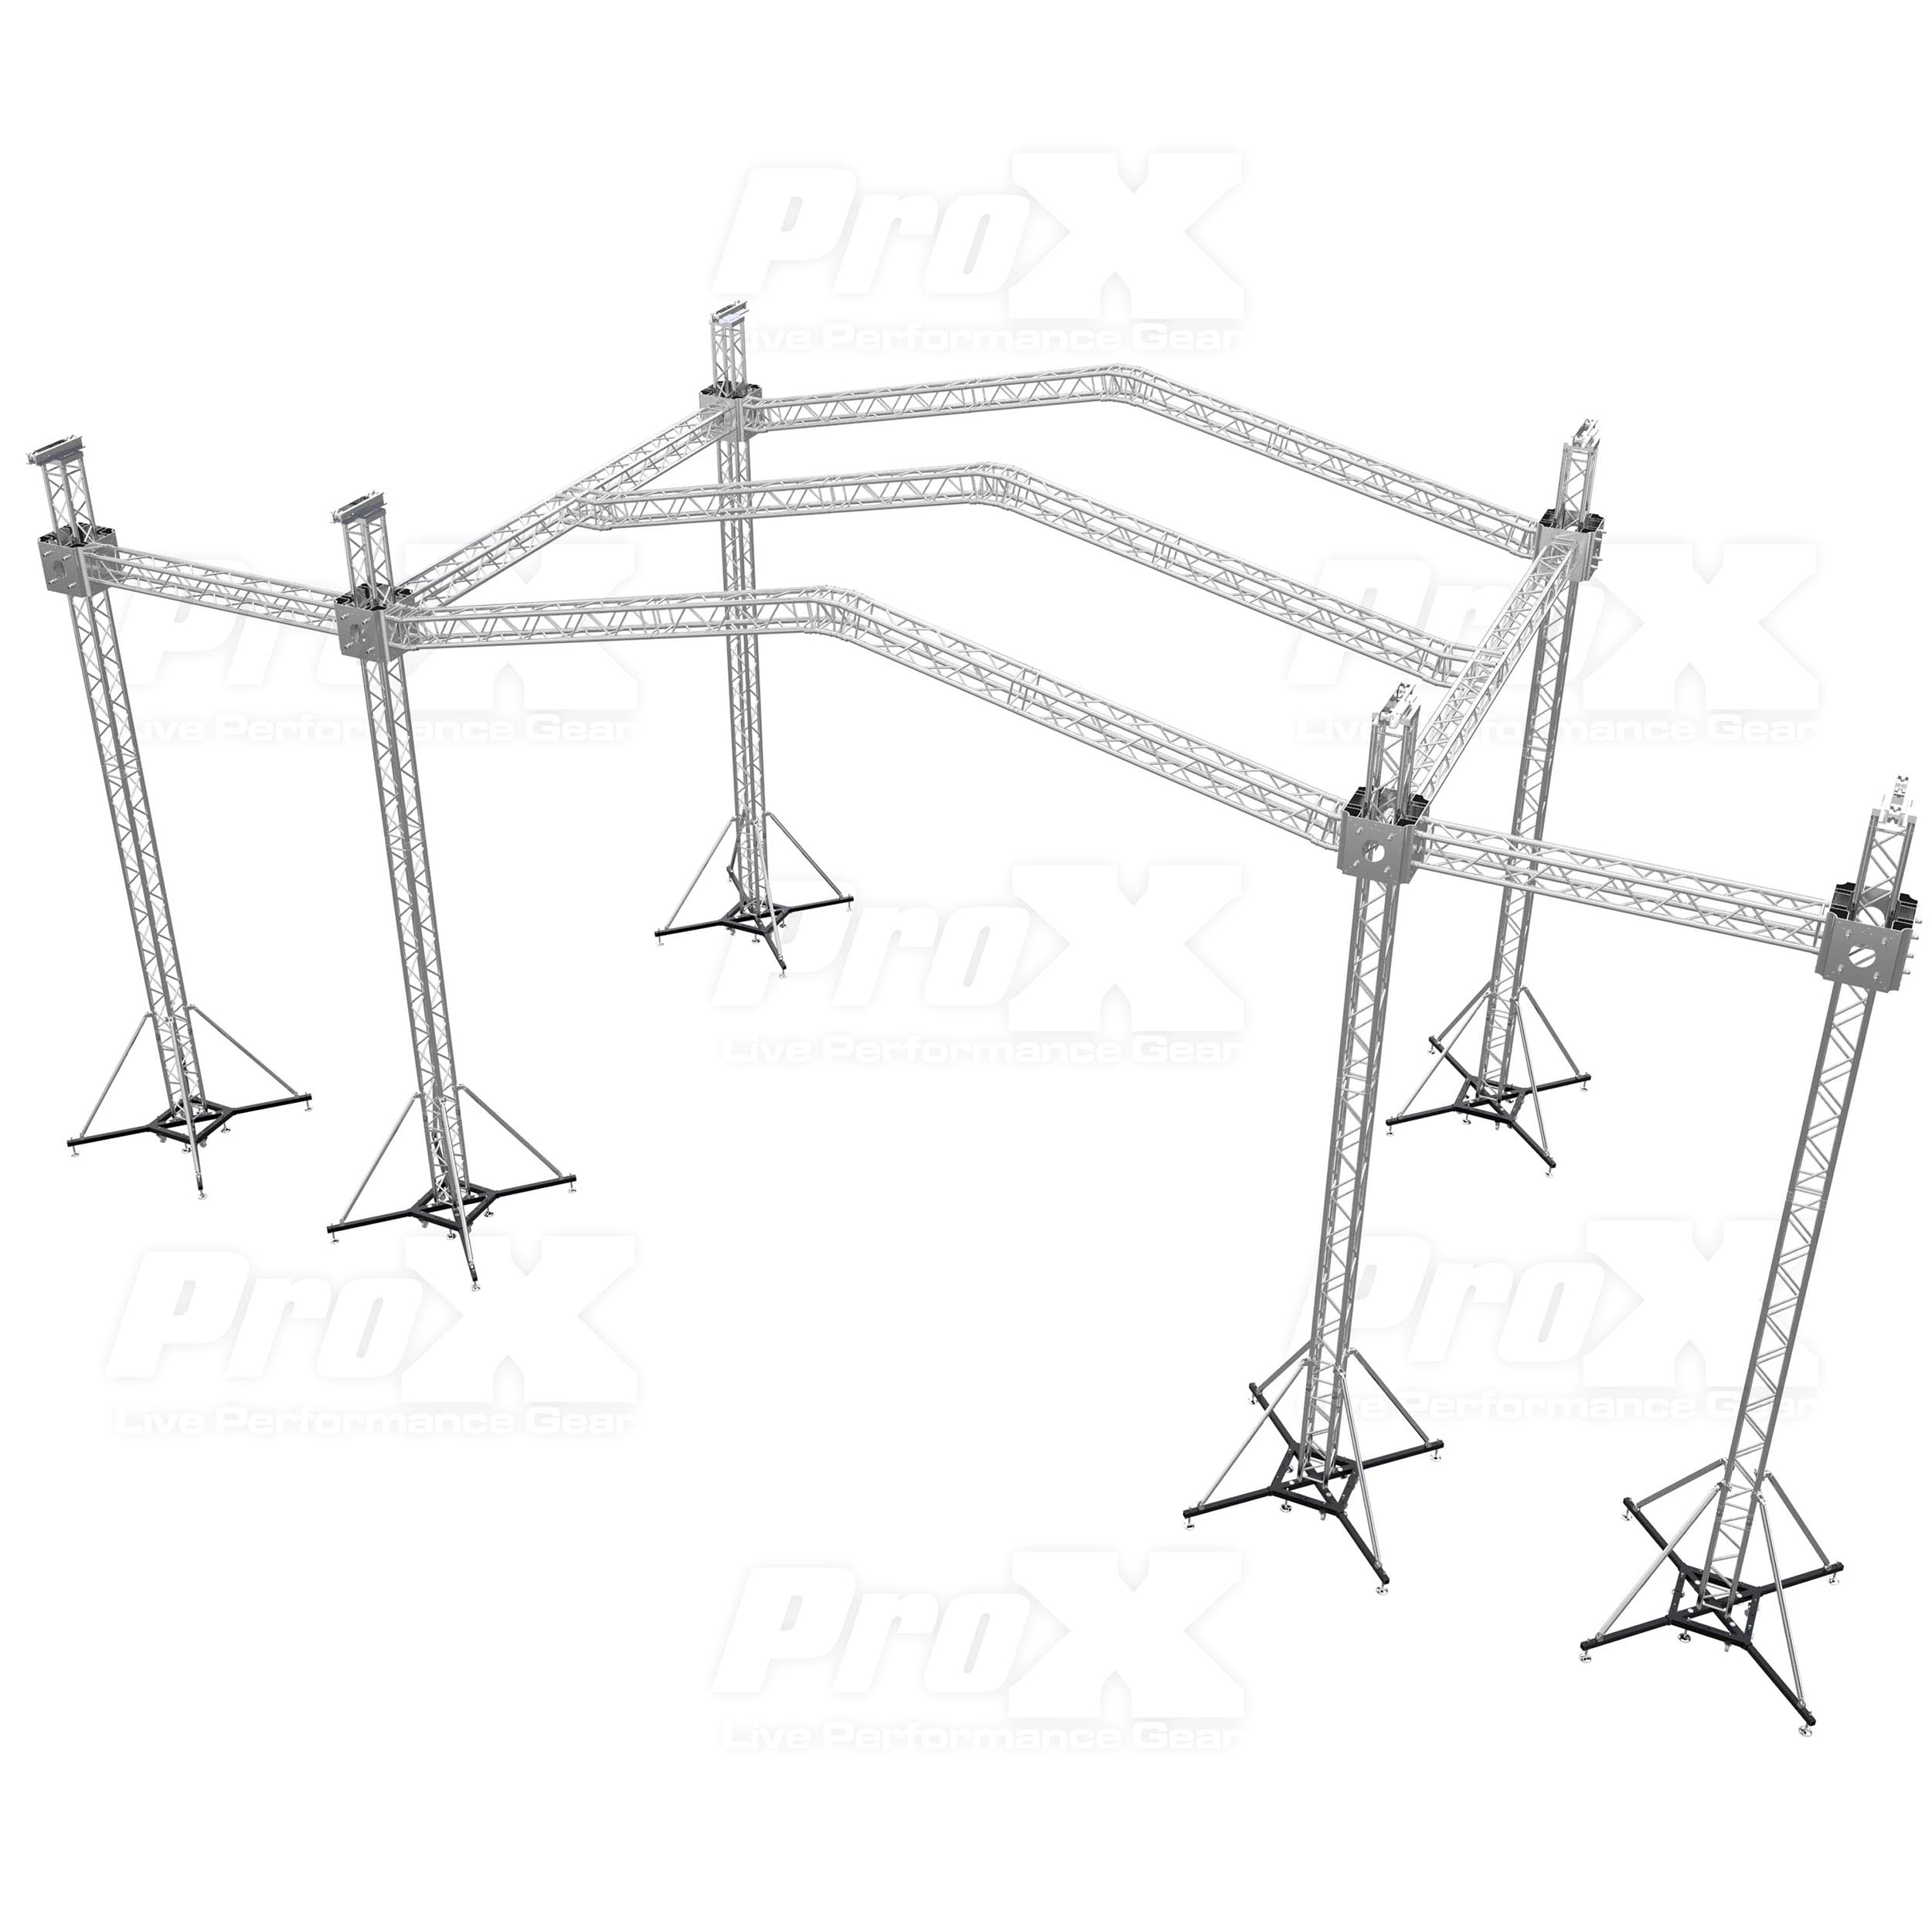 Pro X 12D PR3 Stage Roofing System with 7 Ft Speaker Wings and 6 Chain Hoists | 30 Ft W x 20 Ft L x 23 Ft H XTP-GS302023-PR3-12D